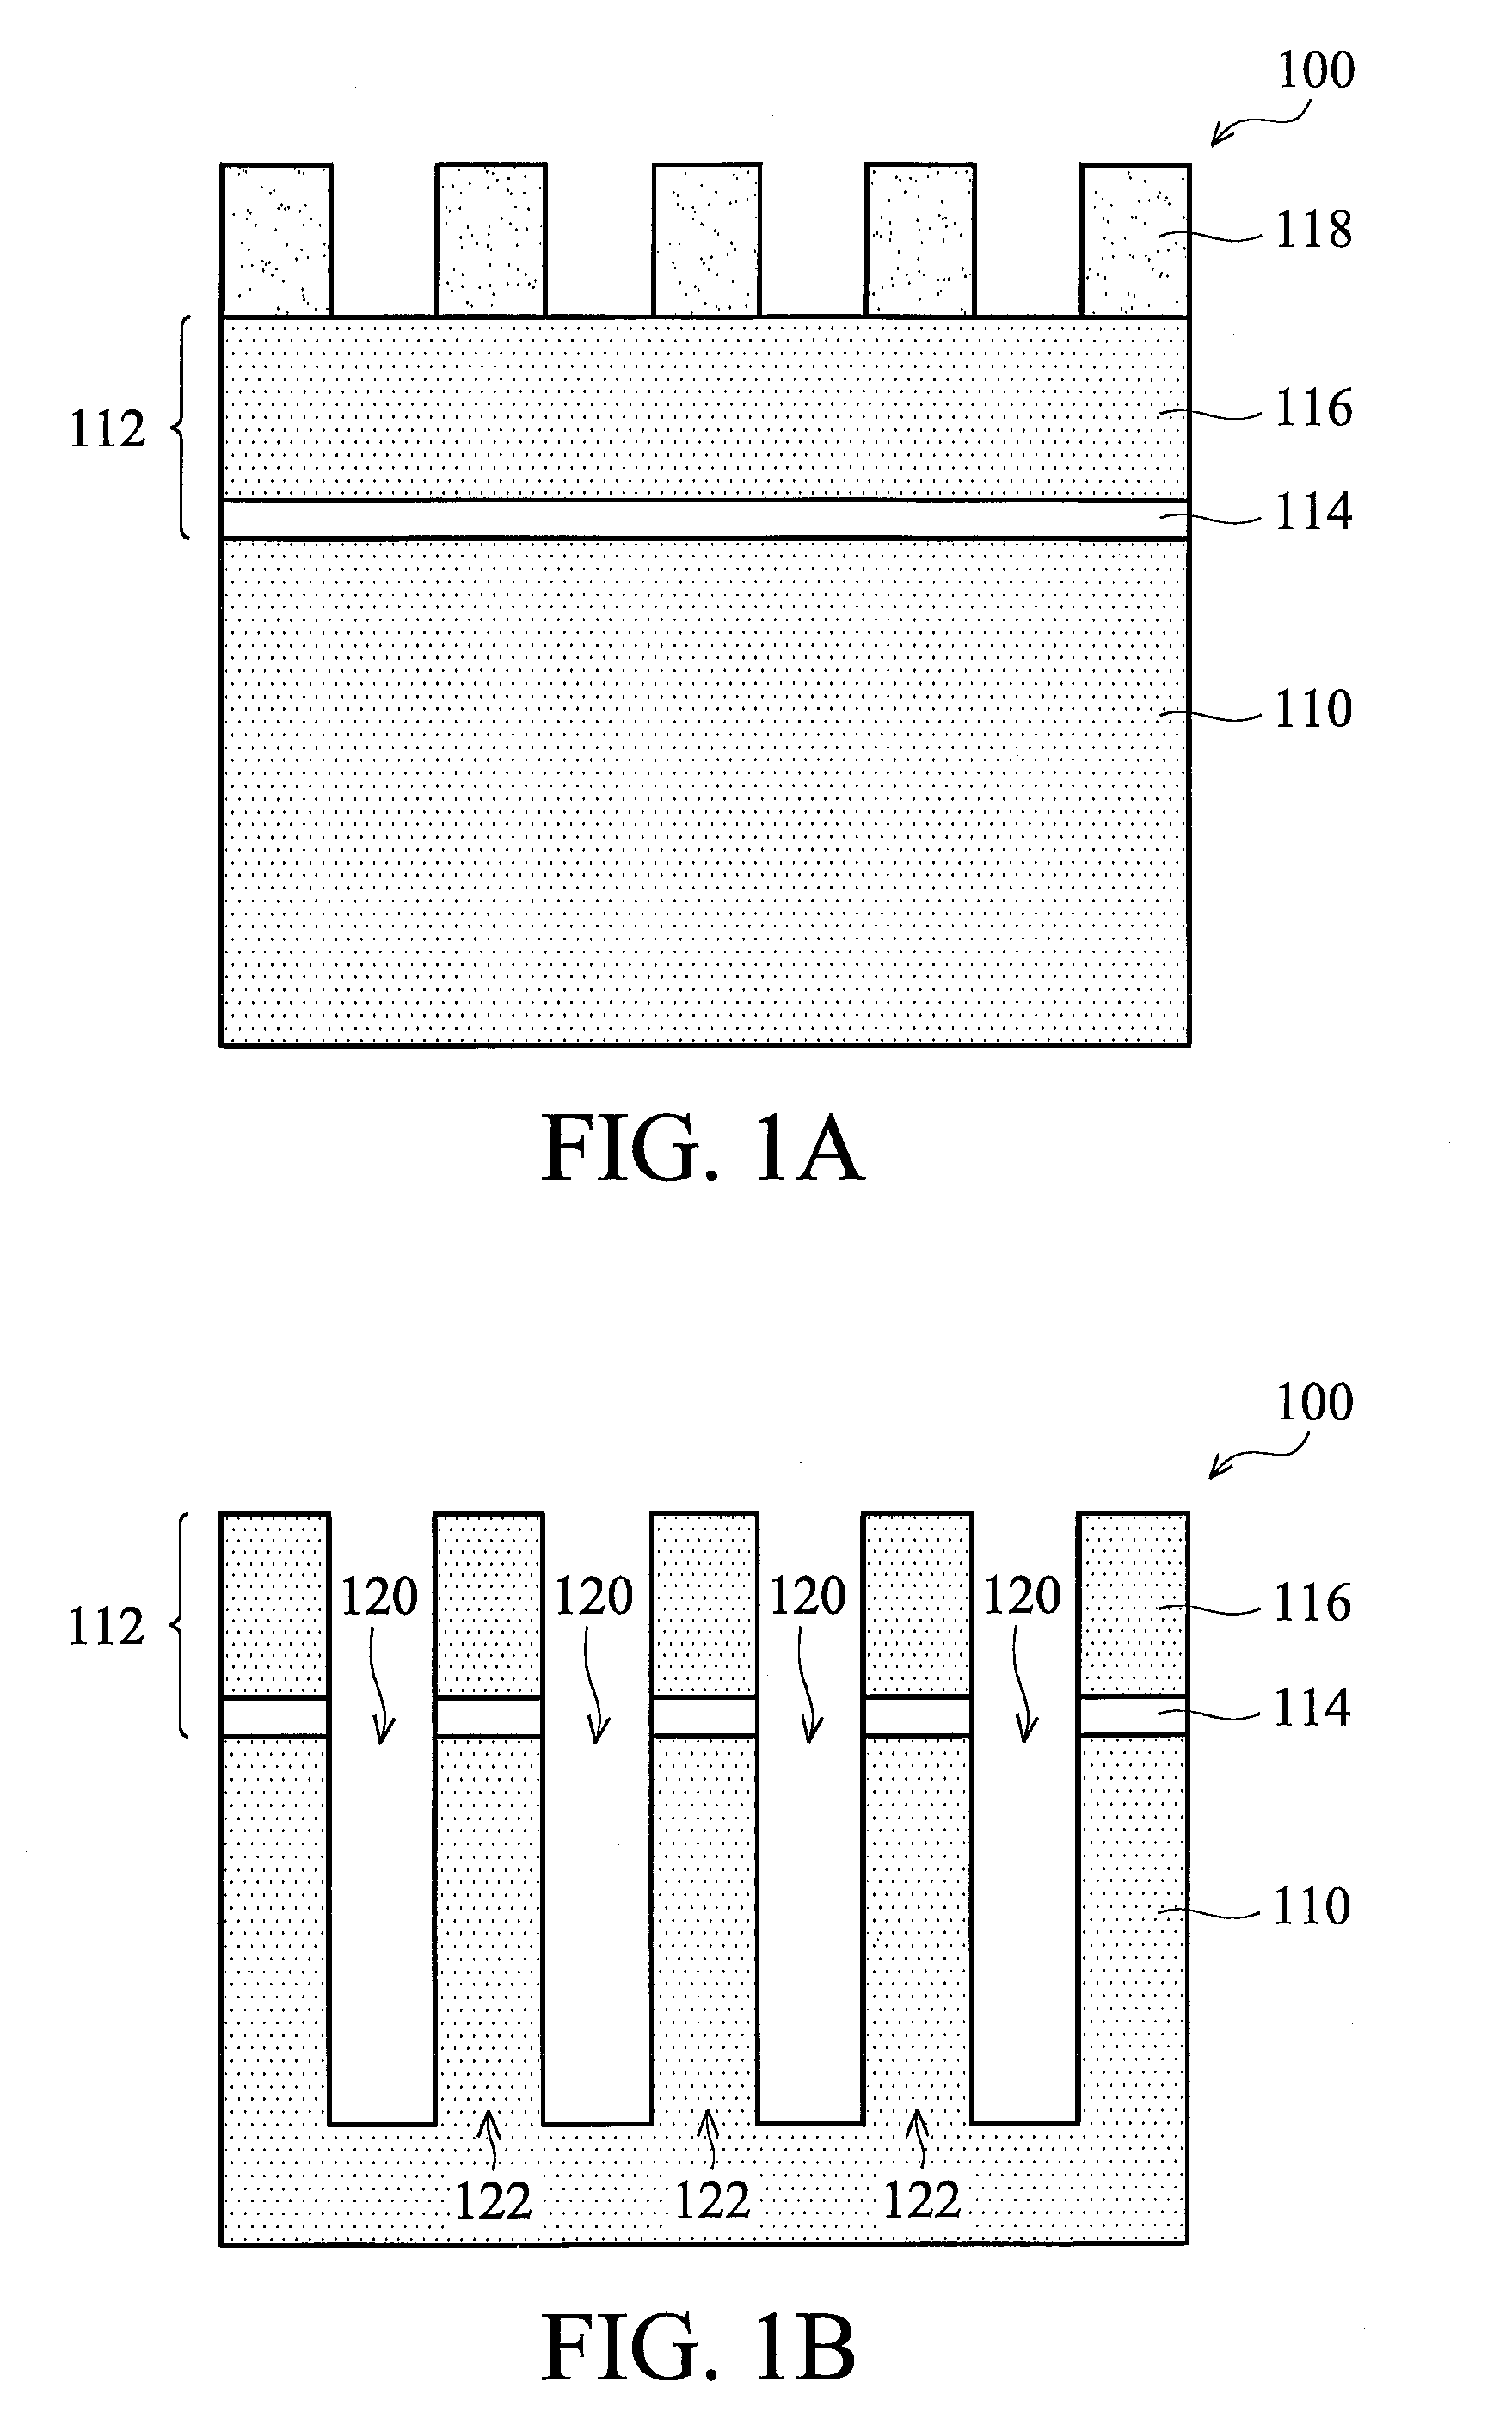 Semiconductor device having multiple fin heights